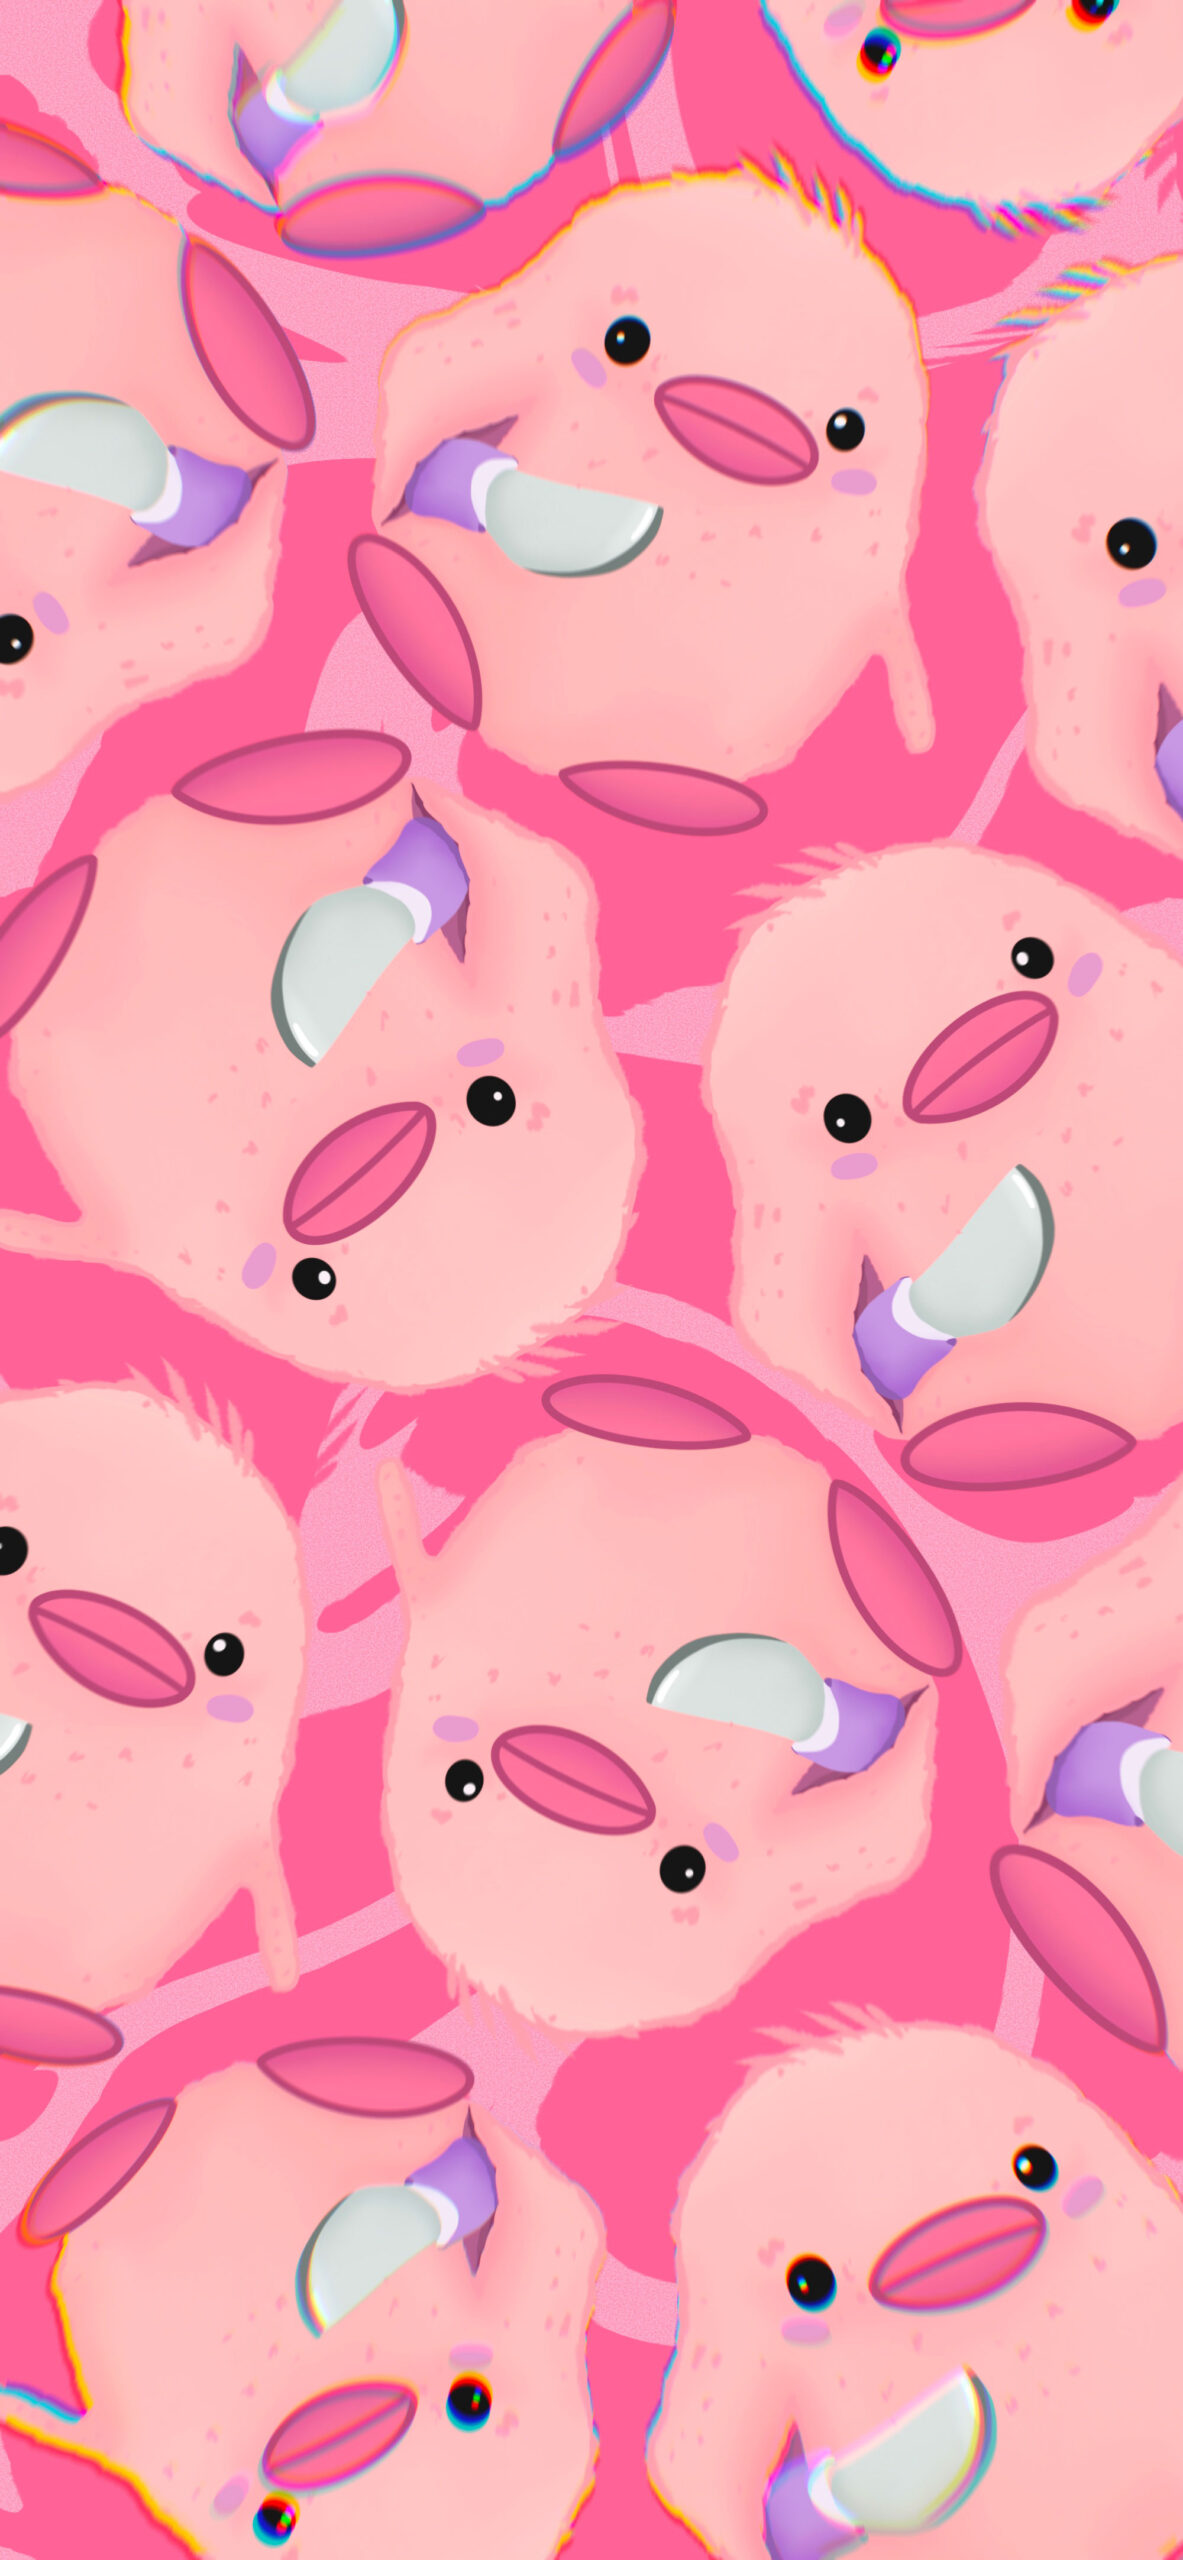 duck with knife meme pink wallpaper 2